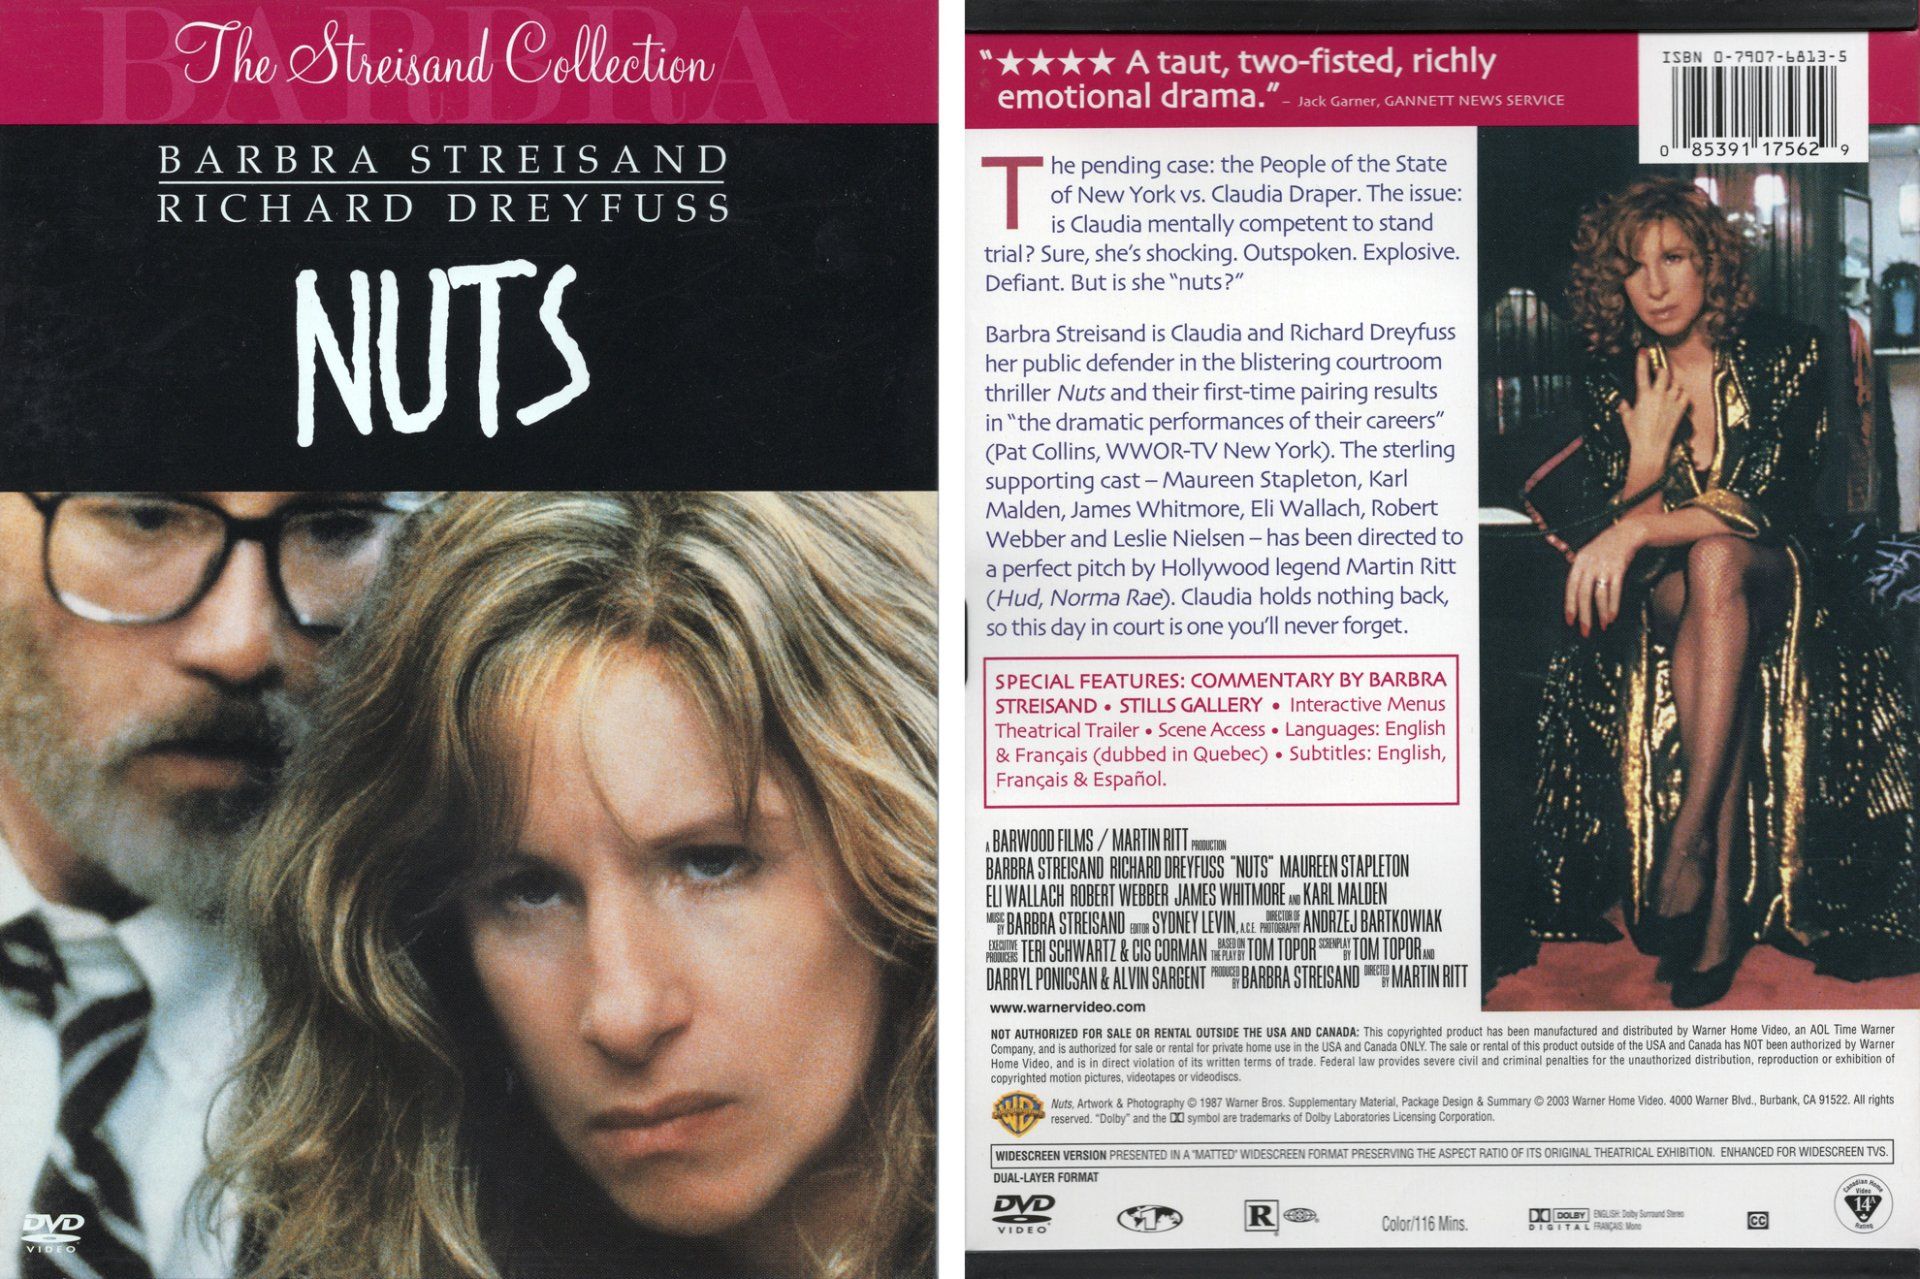 Nuts DVD front and back cover.